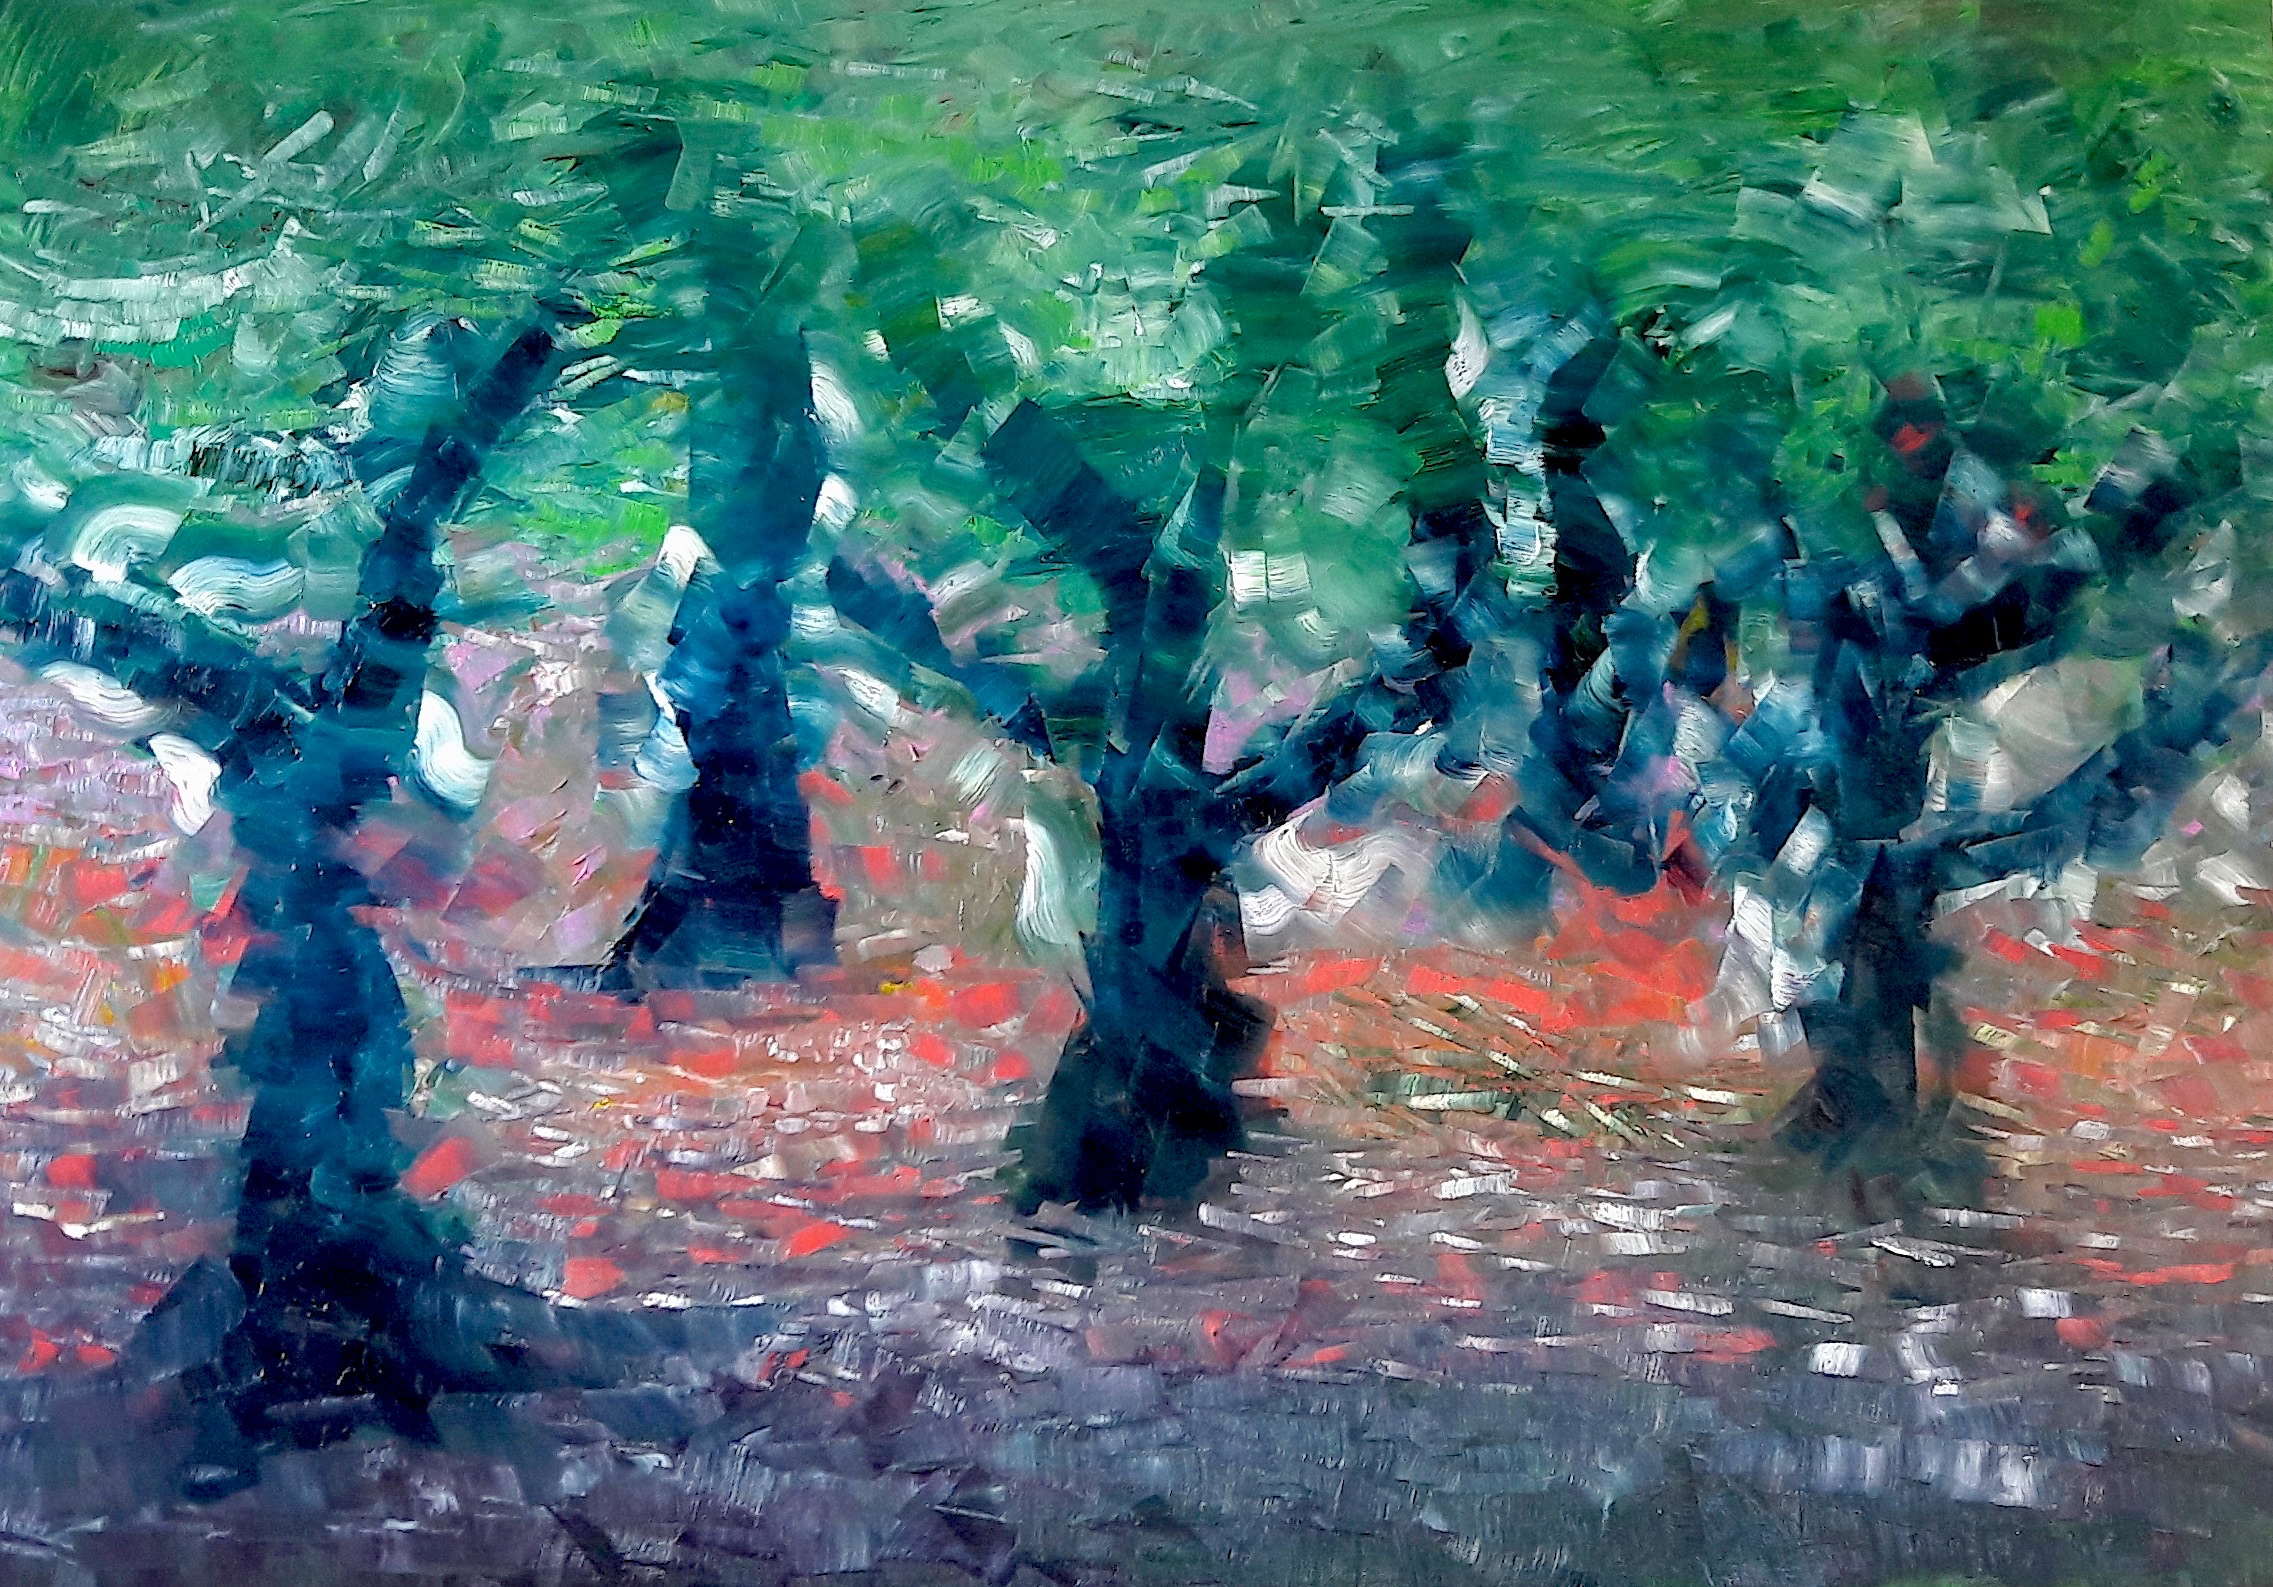 painting of several trees in a forest and they seem to dance Samuel Rondiere a.k.a. Sam Elka